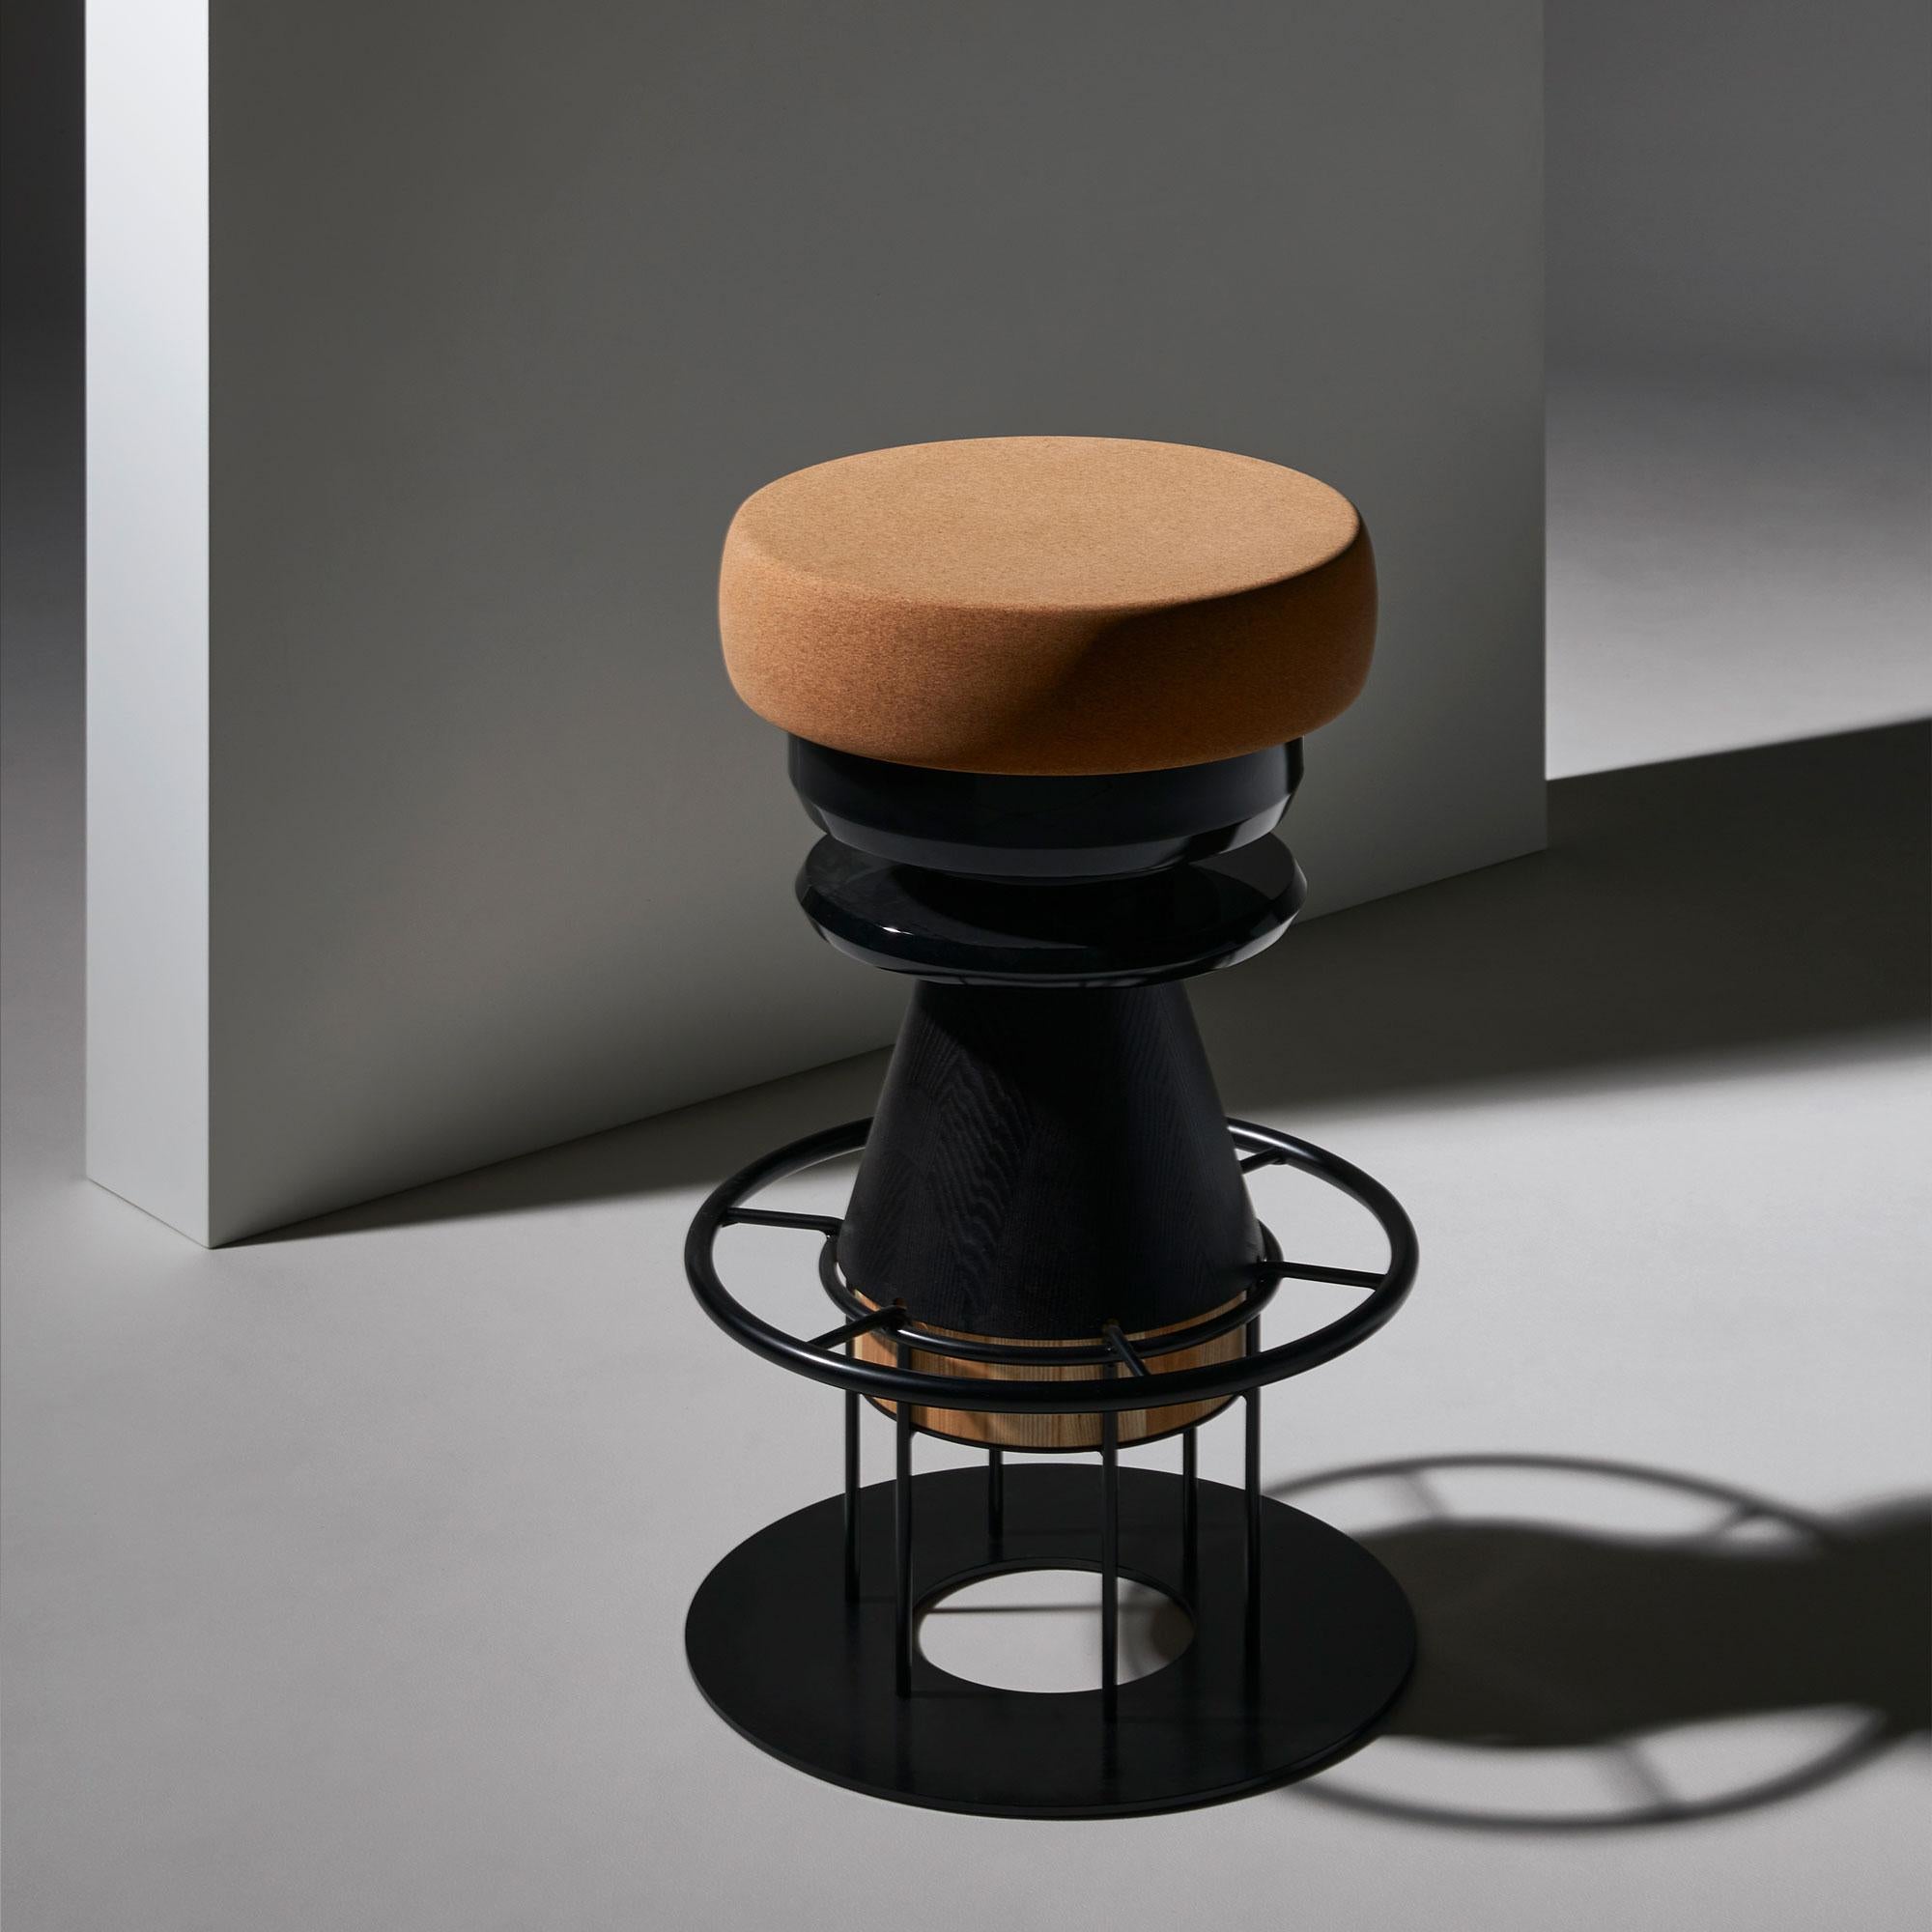 Medium black tembo stool, note design studio
Dimensions: D 36 x H 64 cm
Materials: lacquered steel structure, solid wood (beech) and lacquered MDF, natural cork base.
Available in colorful version and in 3 sizes: H46, H64, H76 cm.

Tembo is a